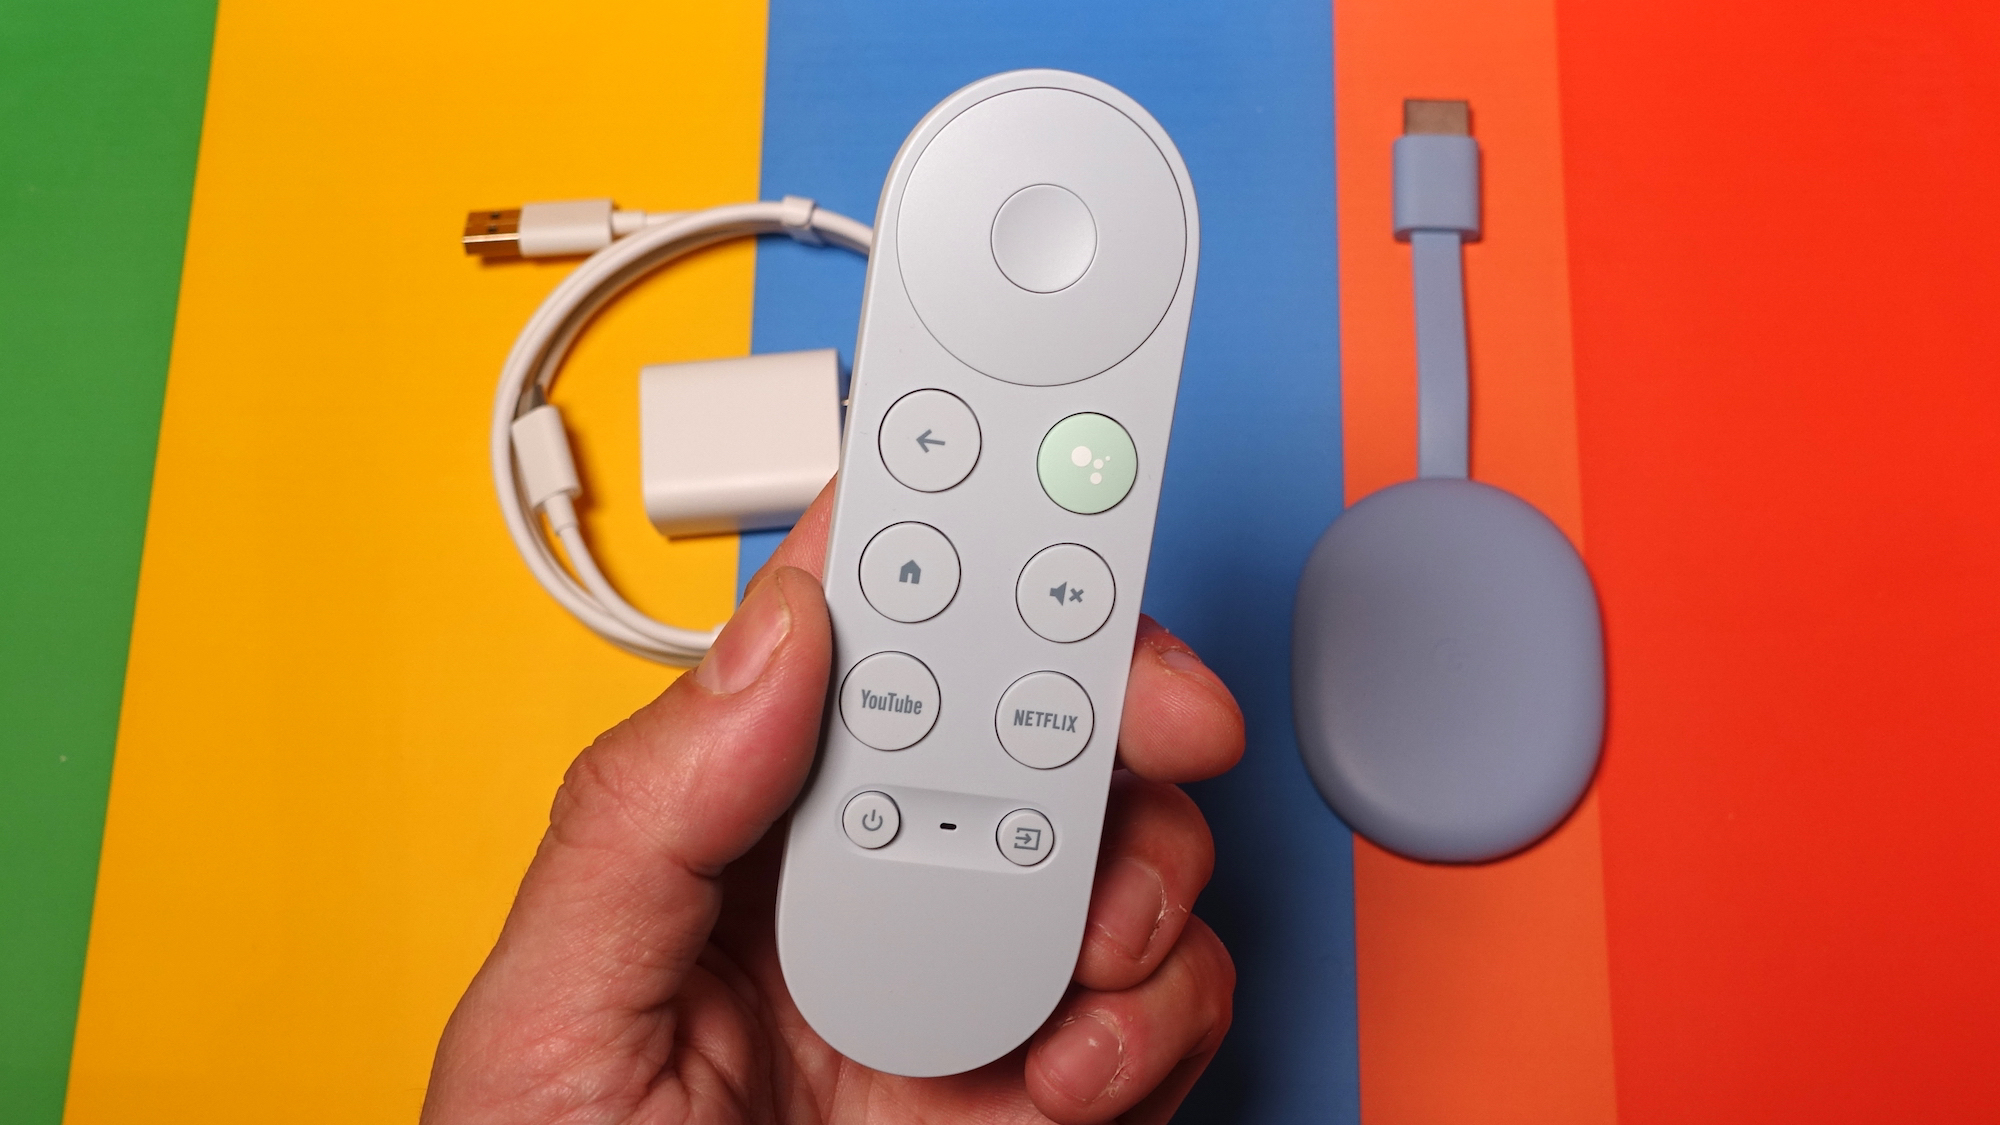 Chromecast with Google TV 4K remote in hand